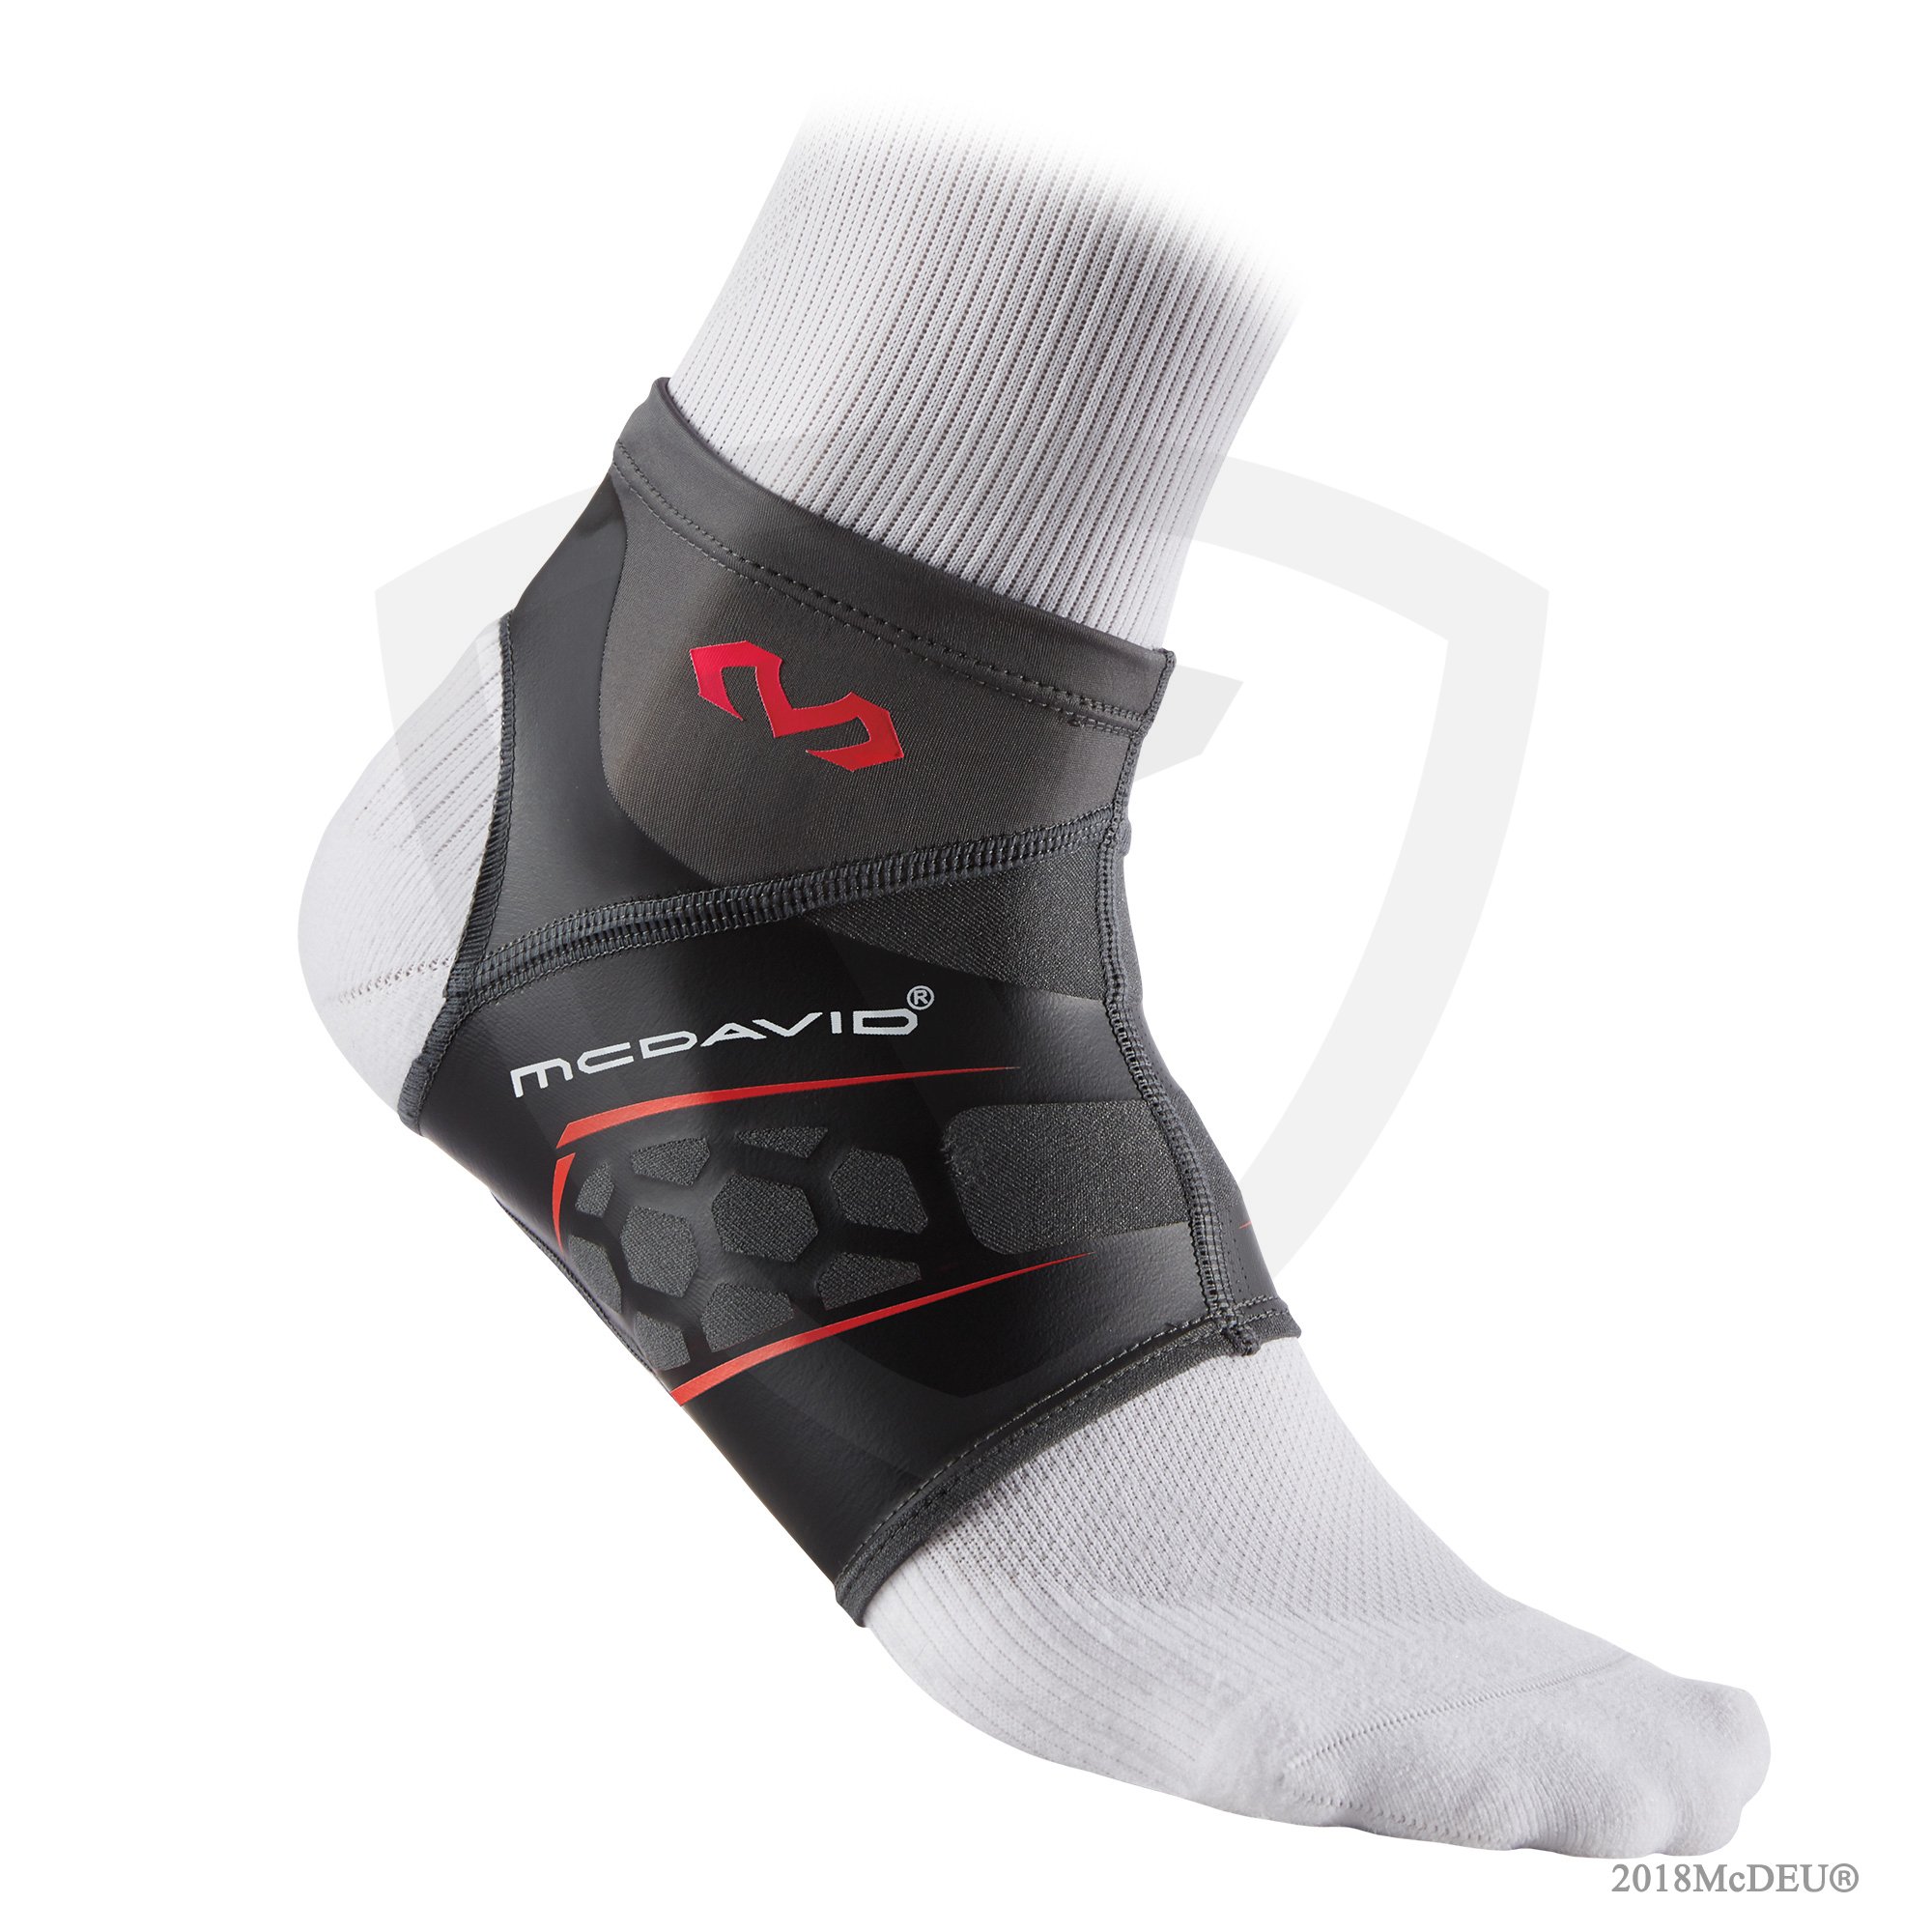 McDavid 4101 Runners Therapy Plantar Fasciitis Sleeve RIGHT L